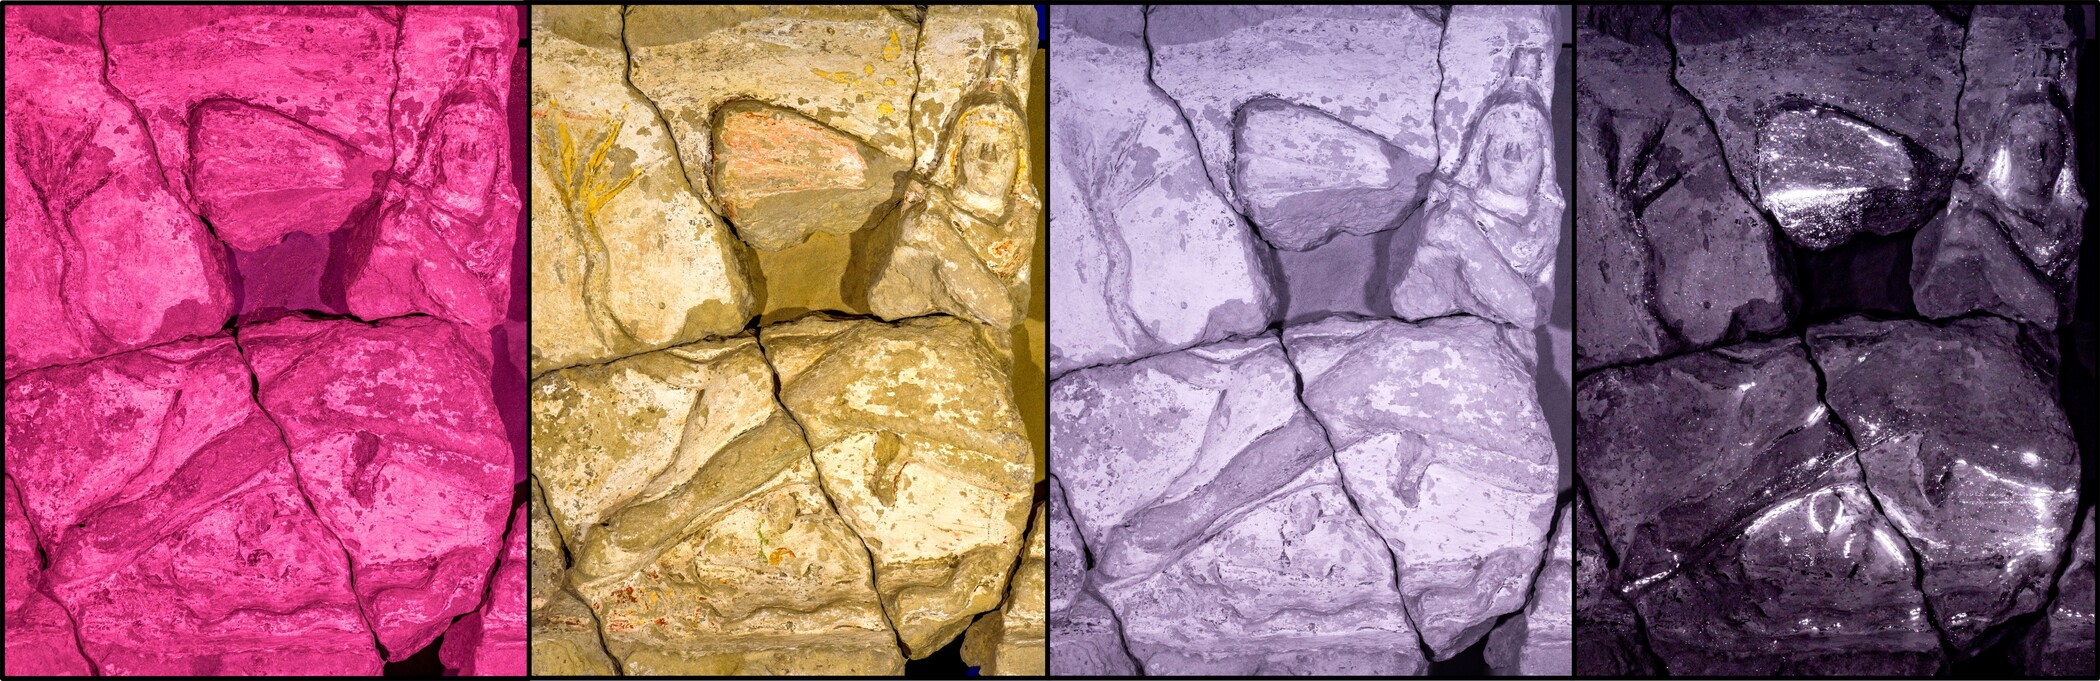 Multispectral analysis of the tauroctony relief 